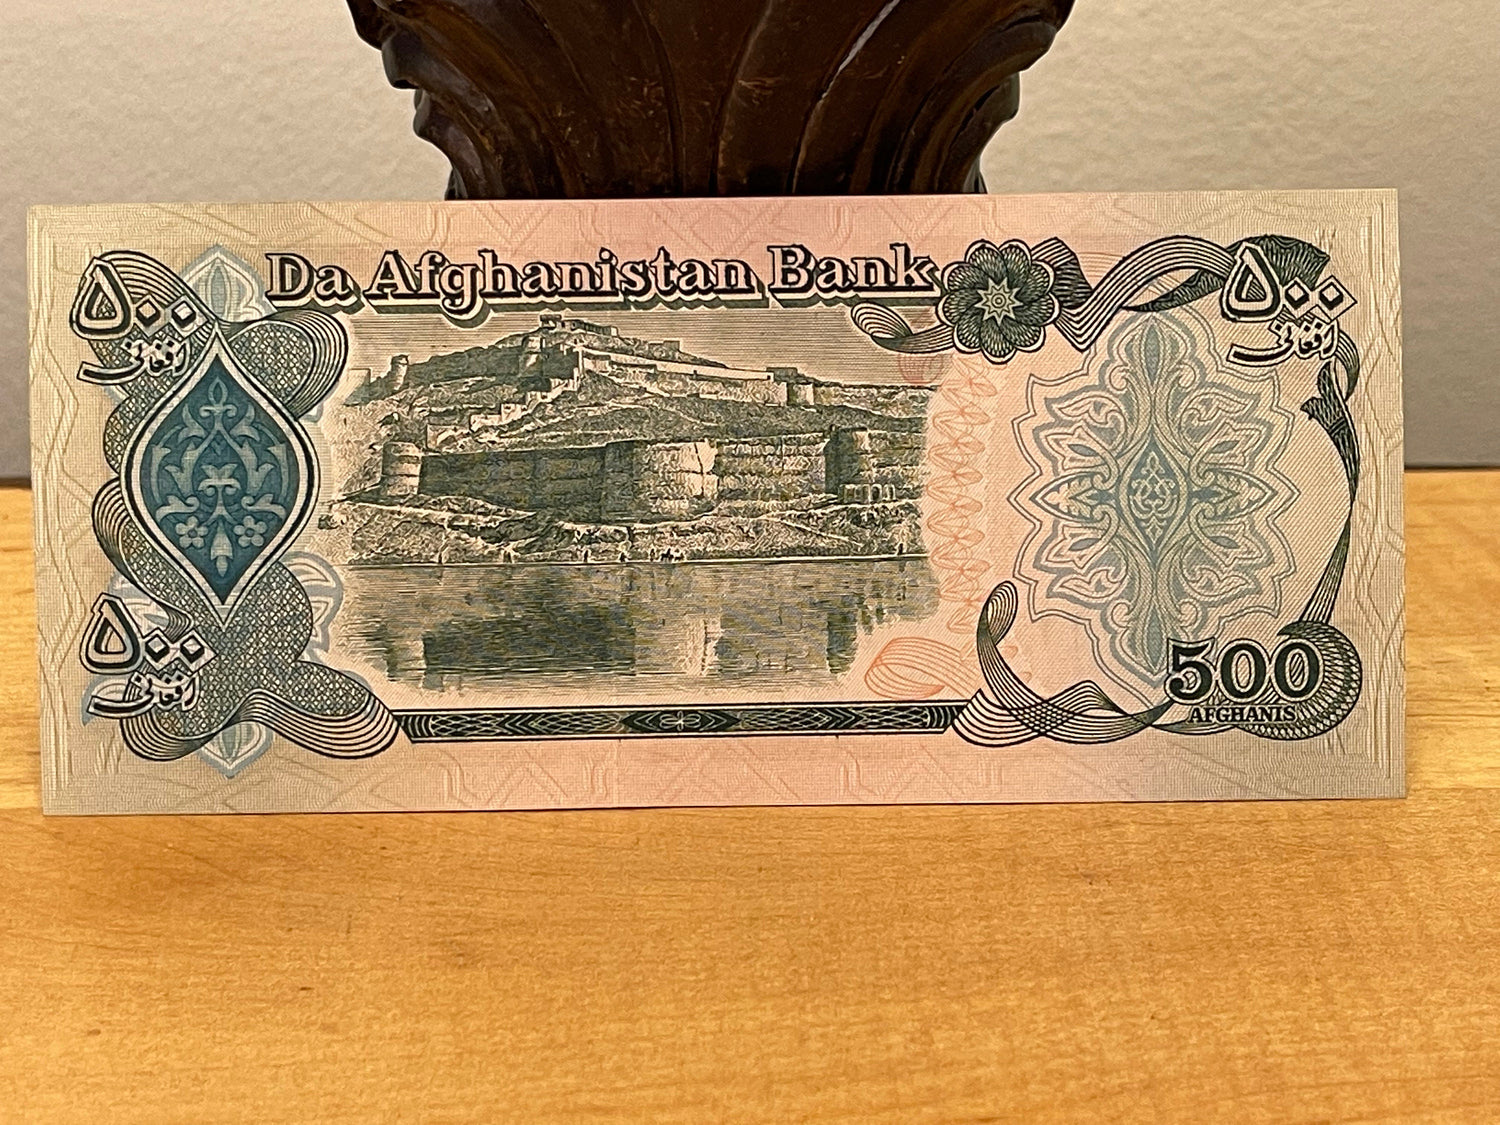 Buzkashi Horsemen & Bala Hissar Fortress 500 Afghanis Afghanistan Authentic Banknote Money for Jewelry and Craft Making (High Fort) (Kabul)